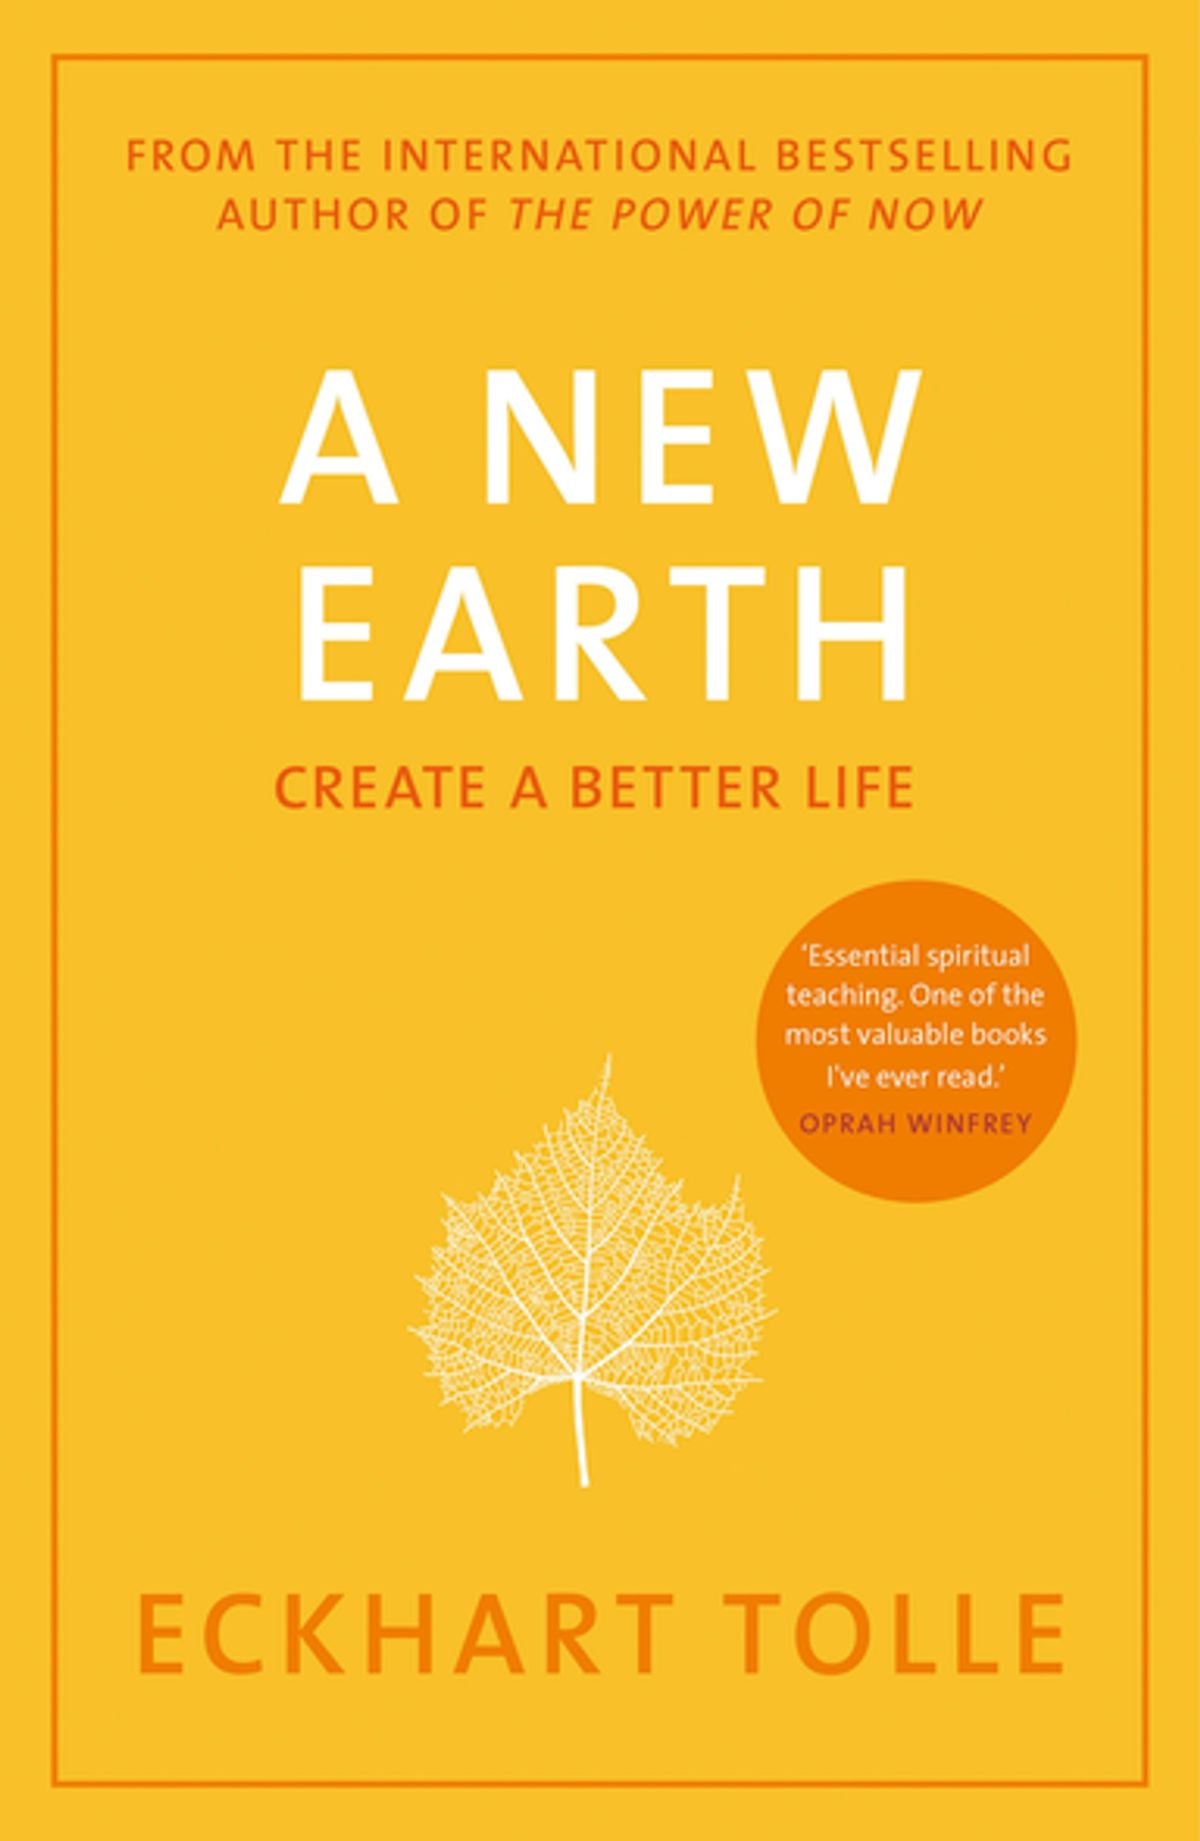 A New Earth; Eckhart Tolle